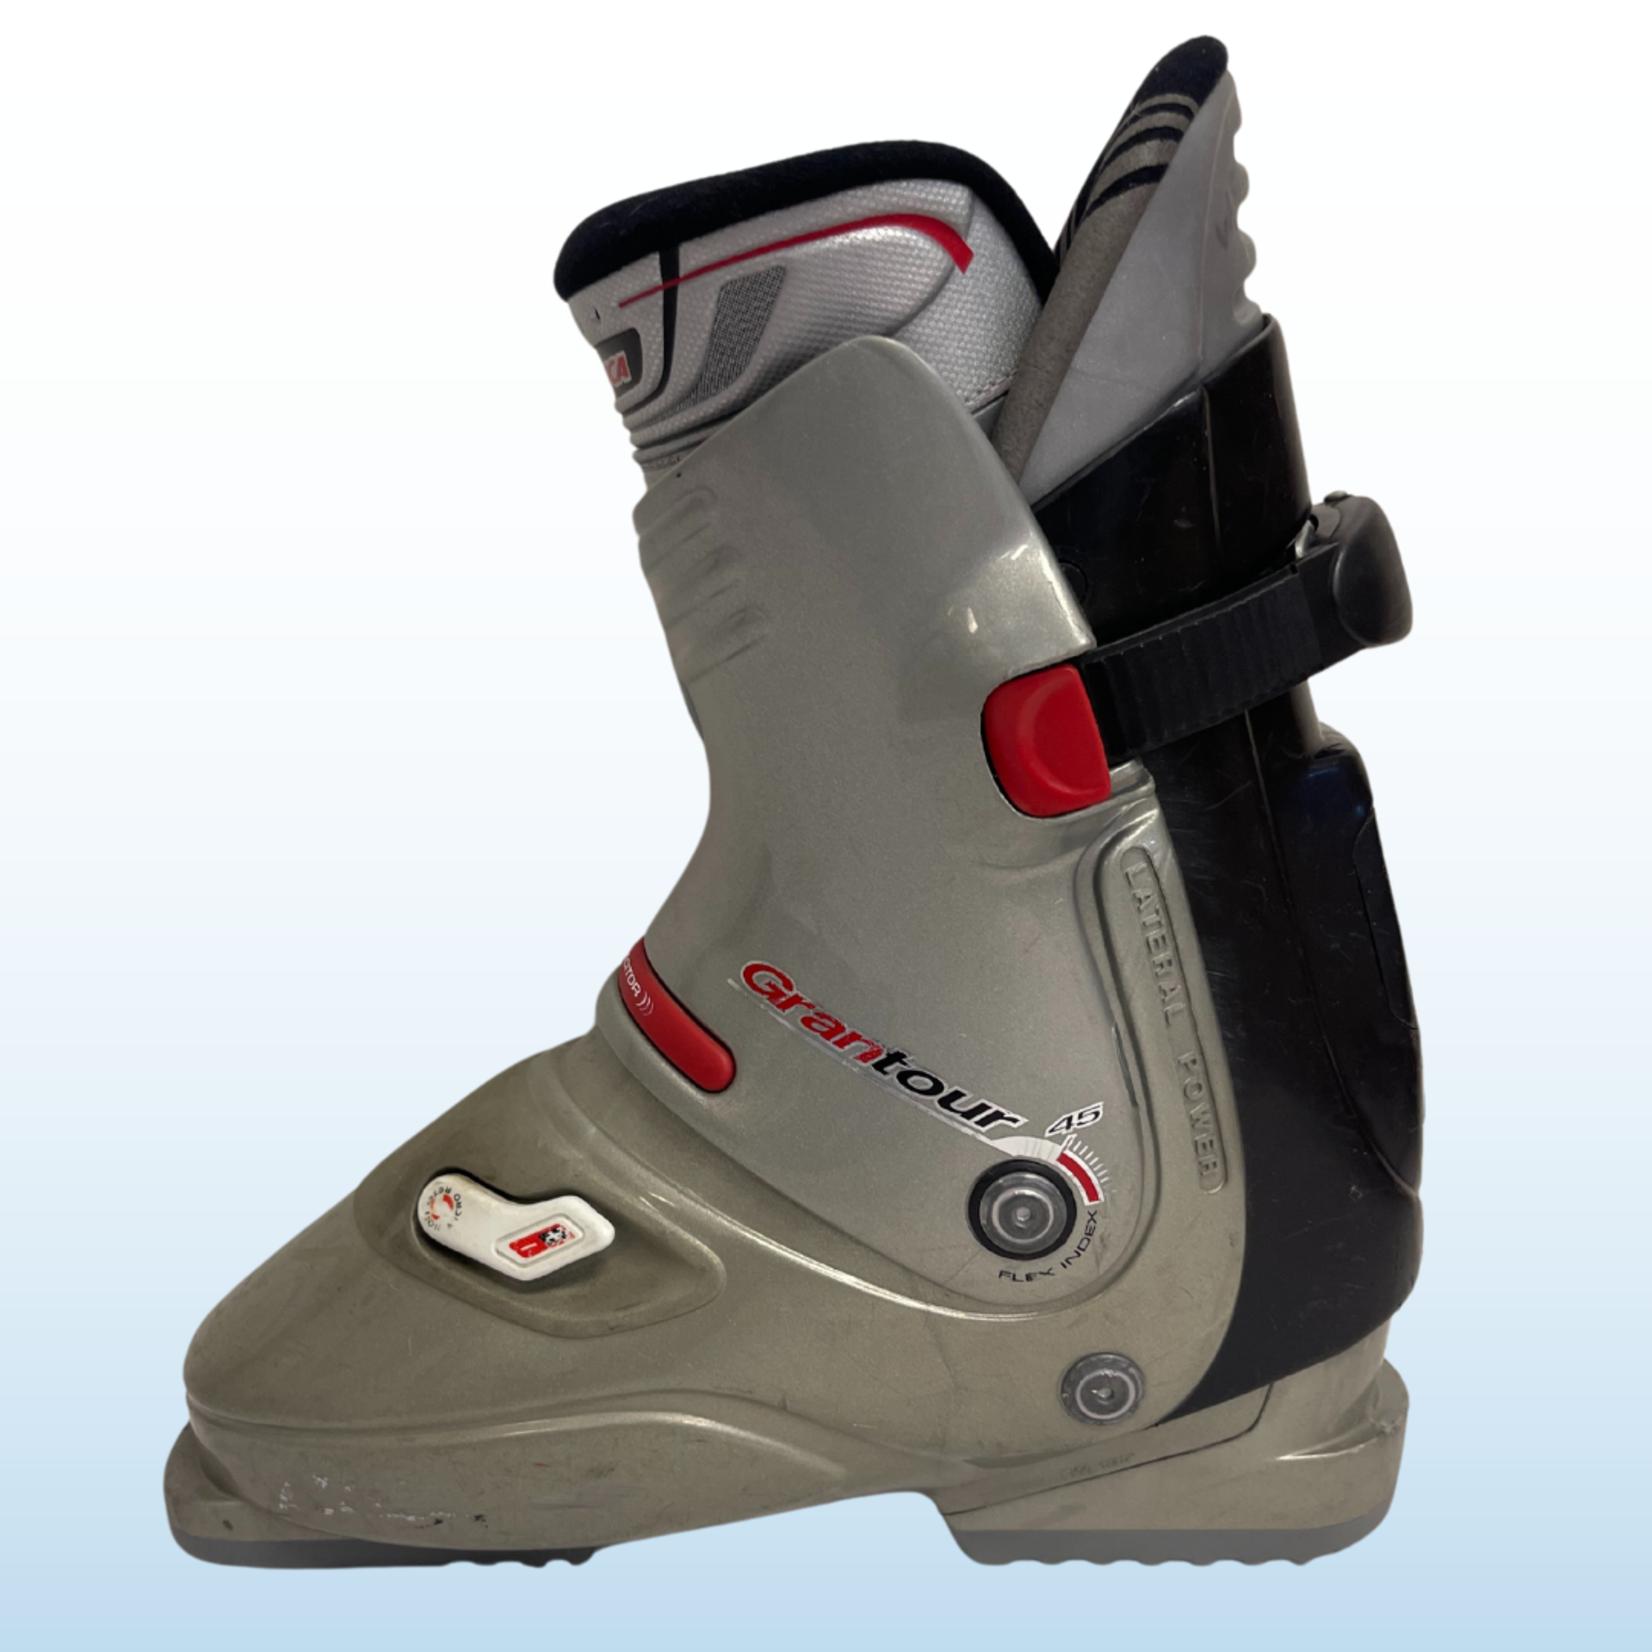 Nordica Nordica GranTour Rear Entry Ski Boots, Size 25.5 SOLD AS IS NO REFUNDS OR EXCHANGES